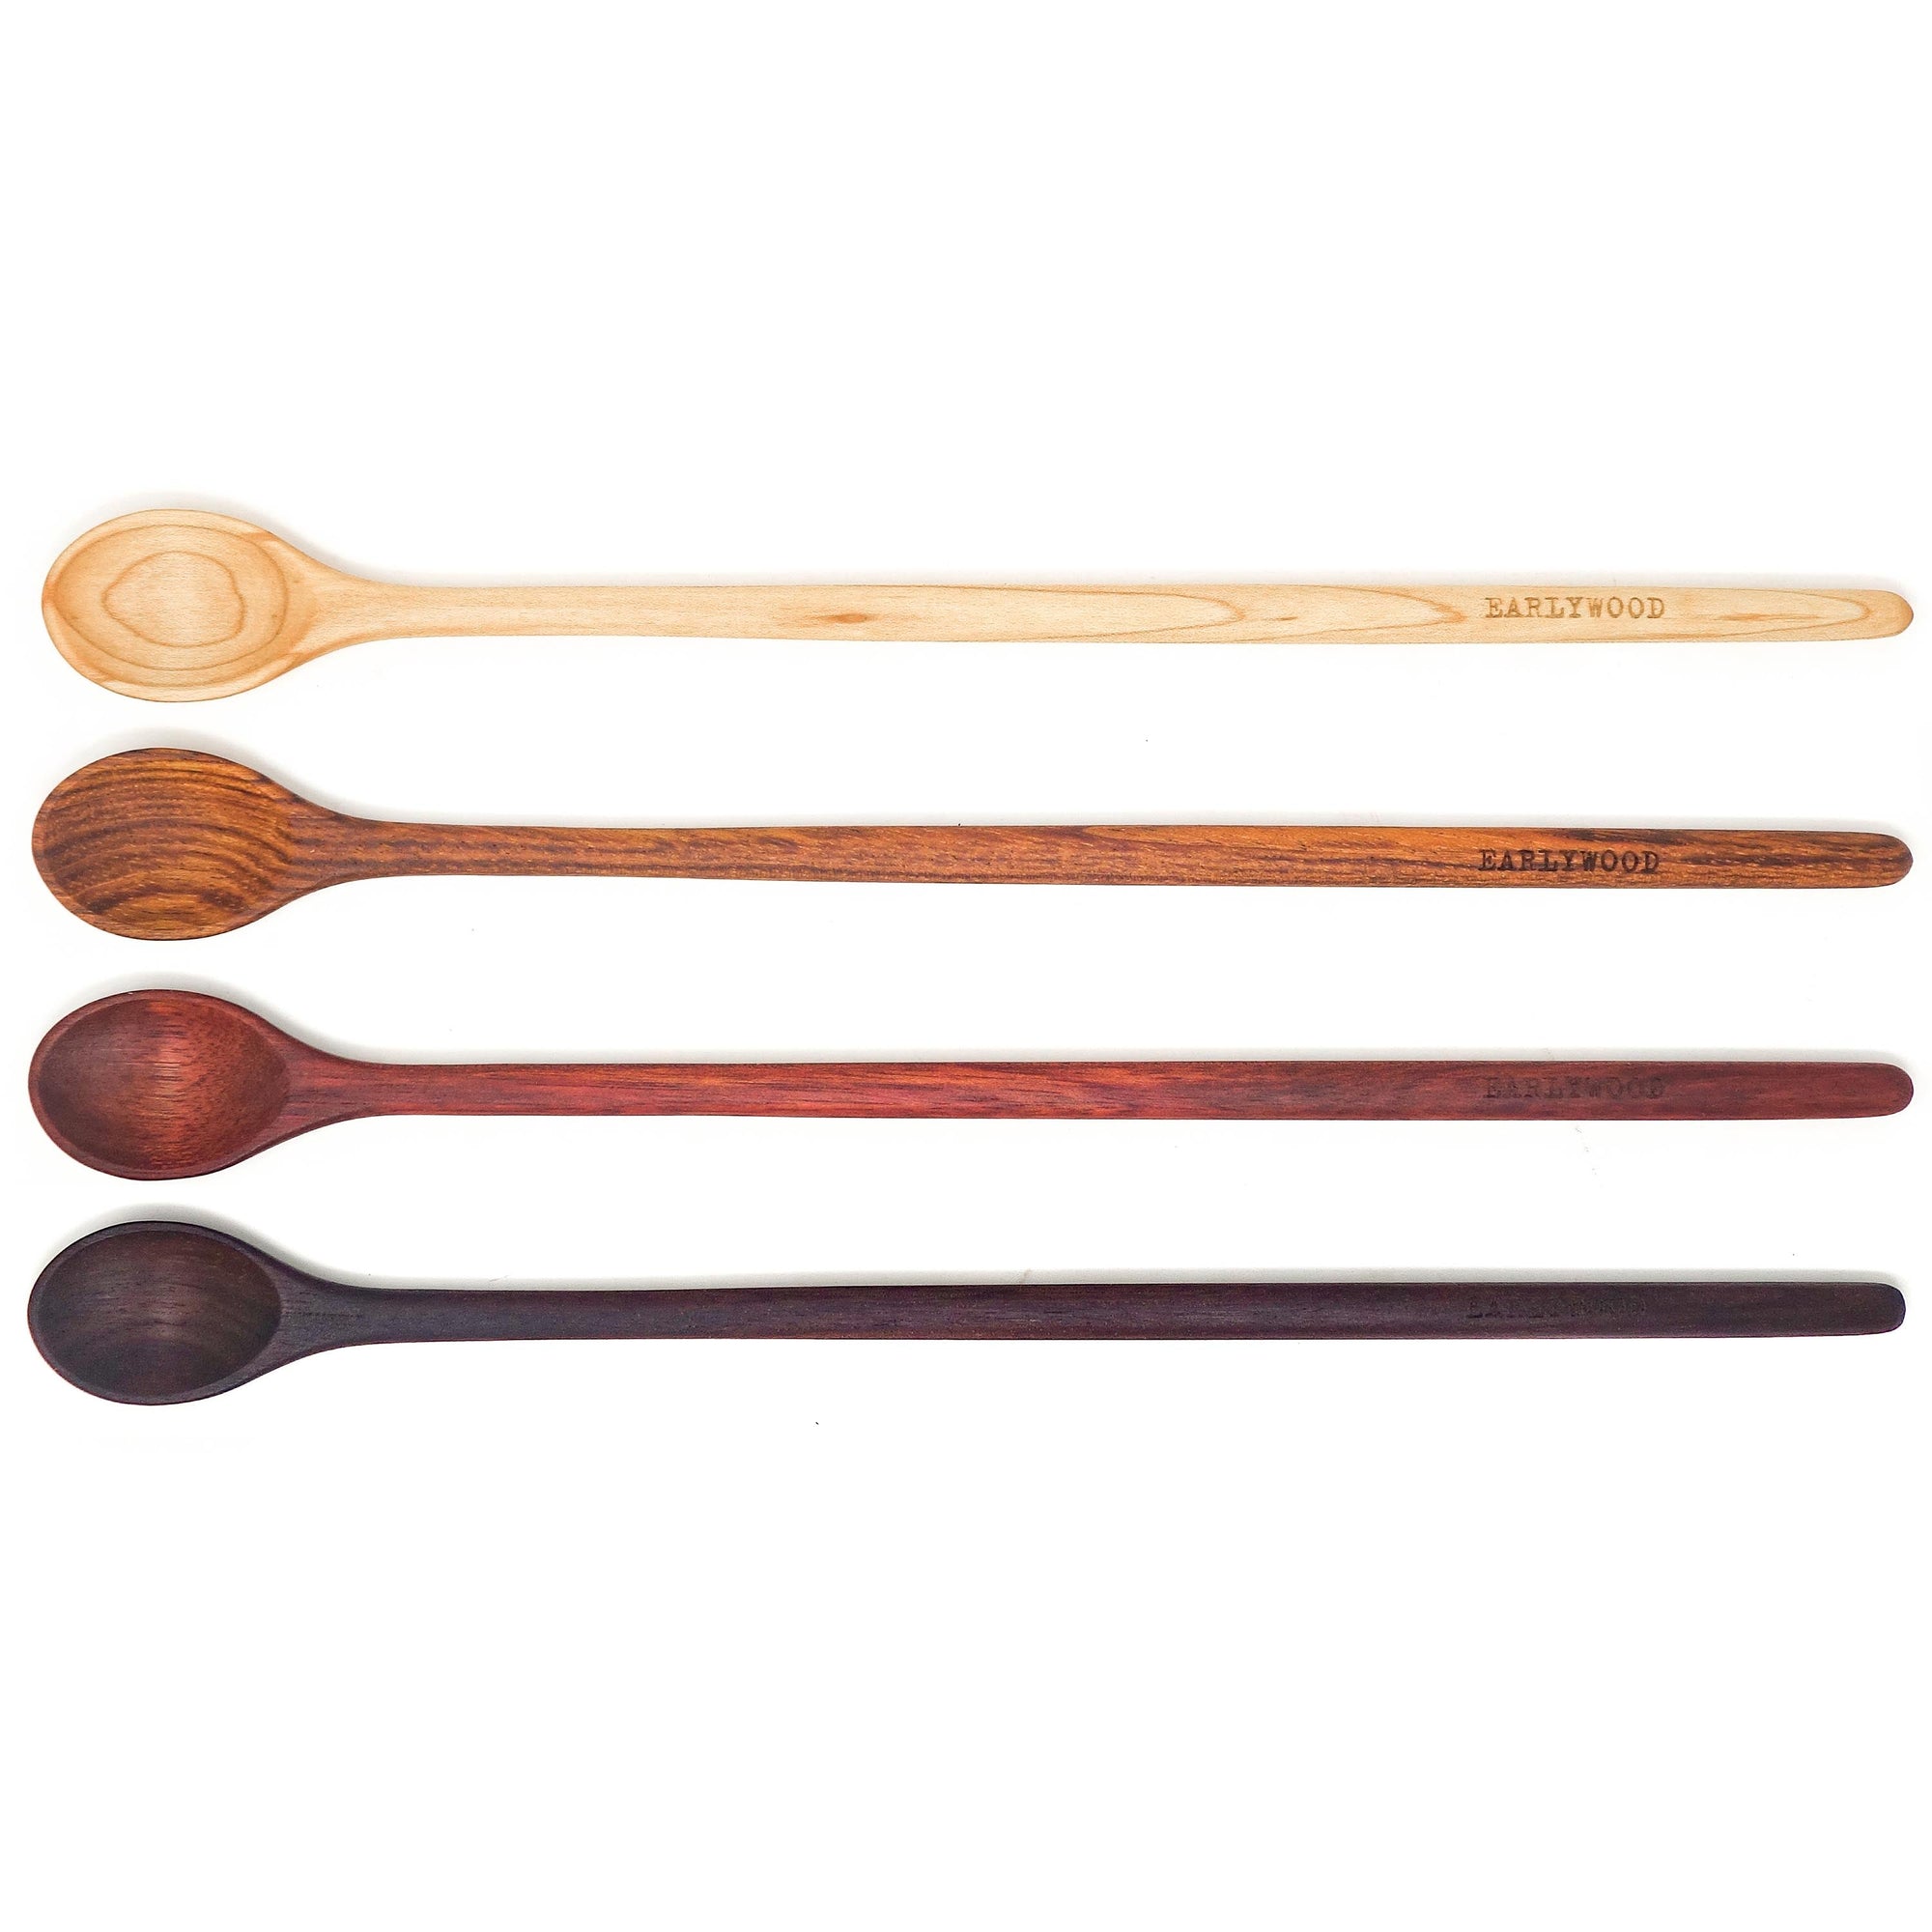 set of 4 long thing wooden tasting spoons - Earlywood